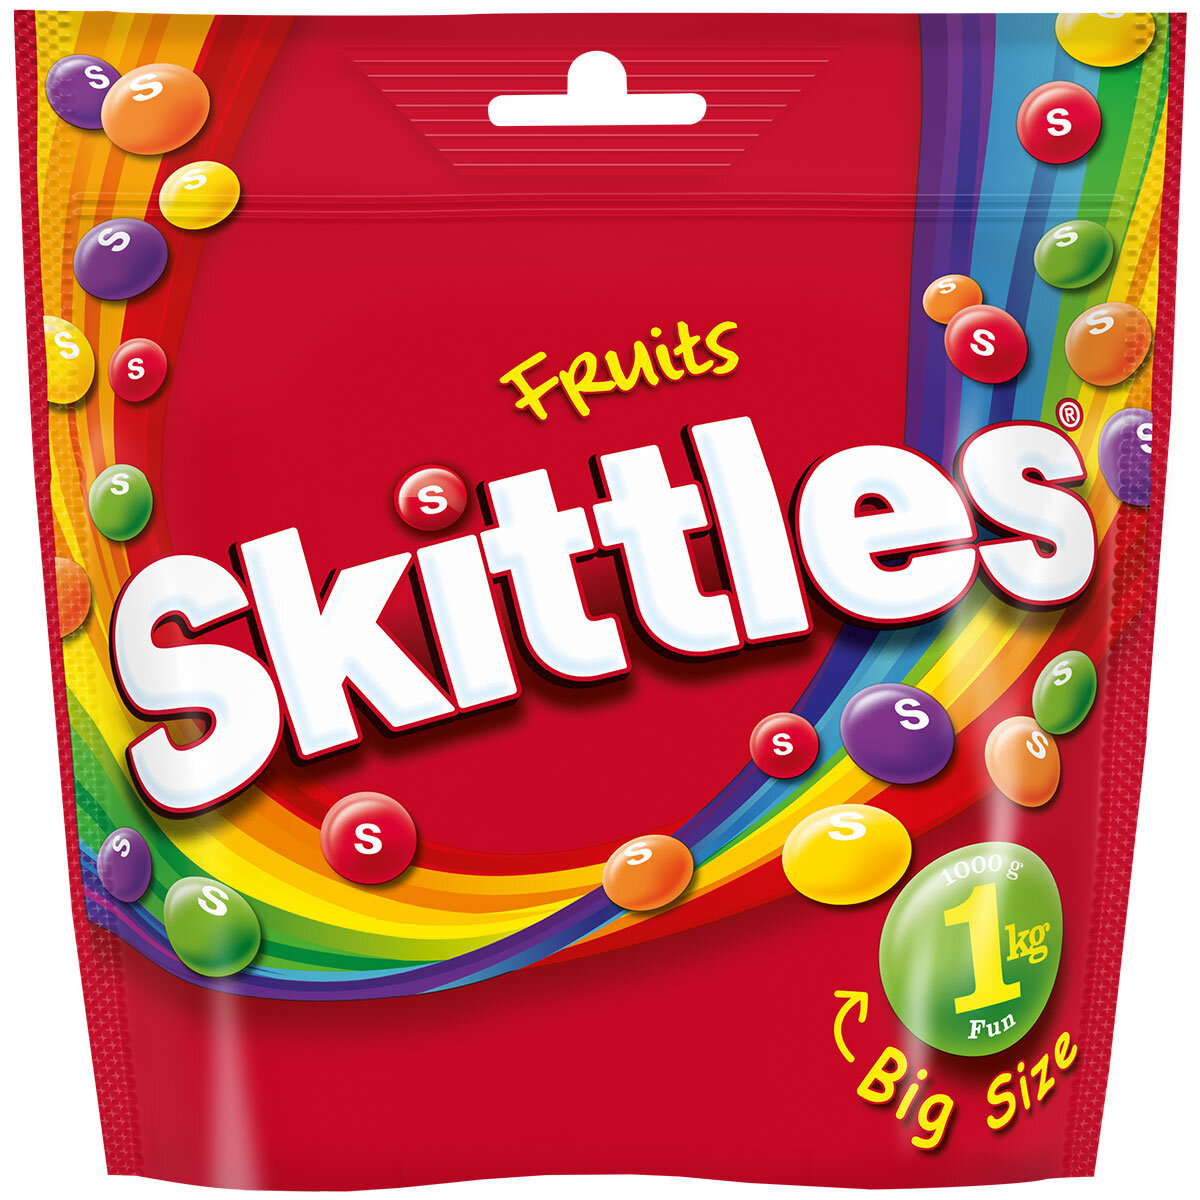 Cut out image of Skittles pack on white background